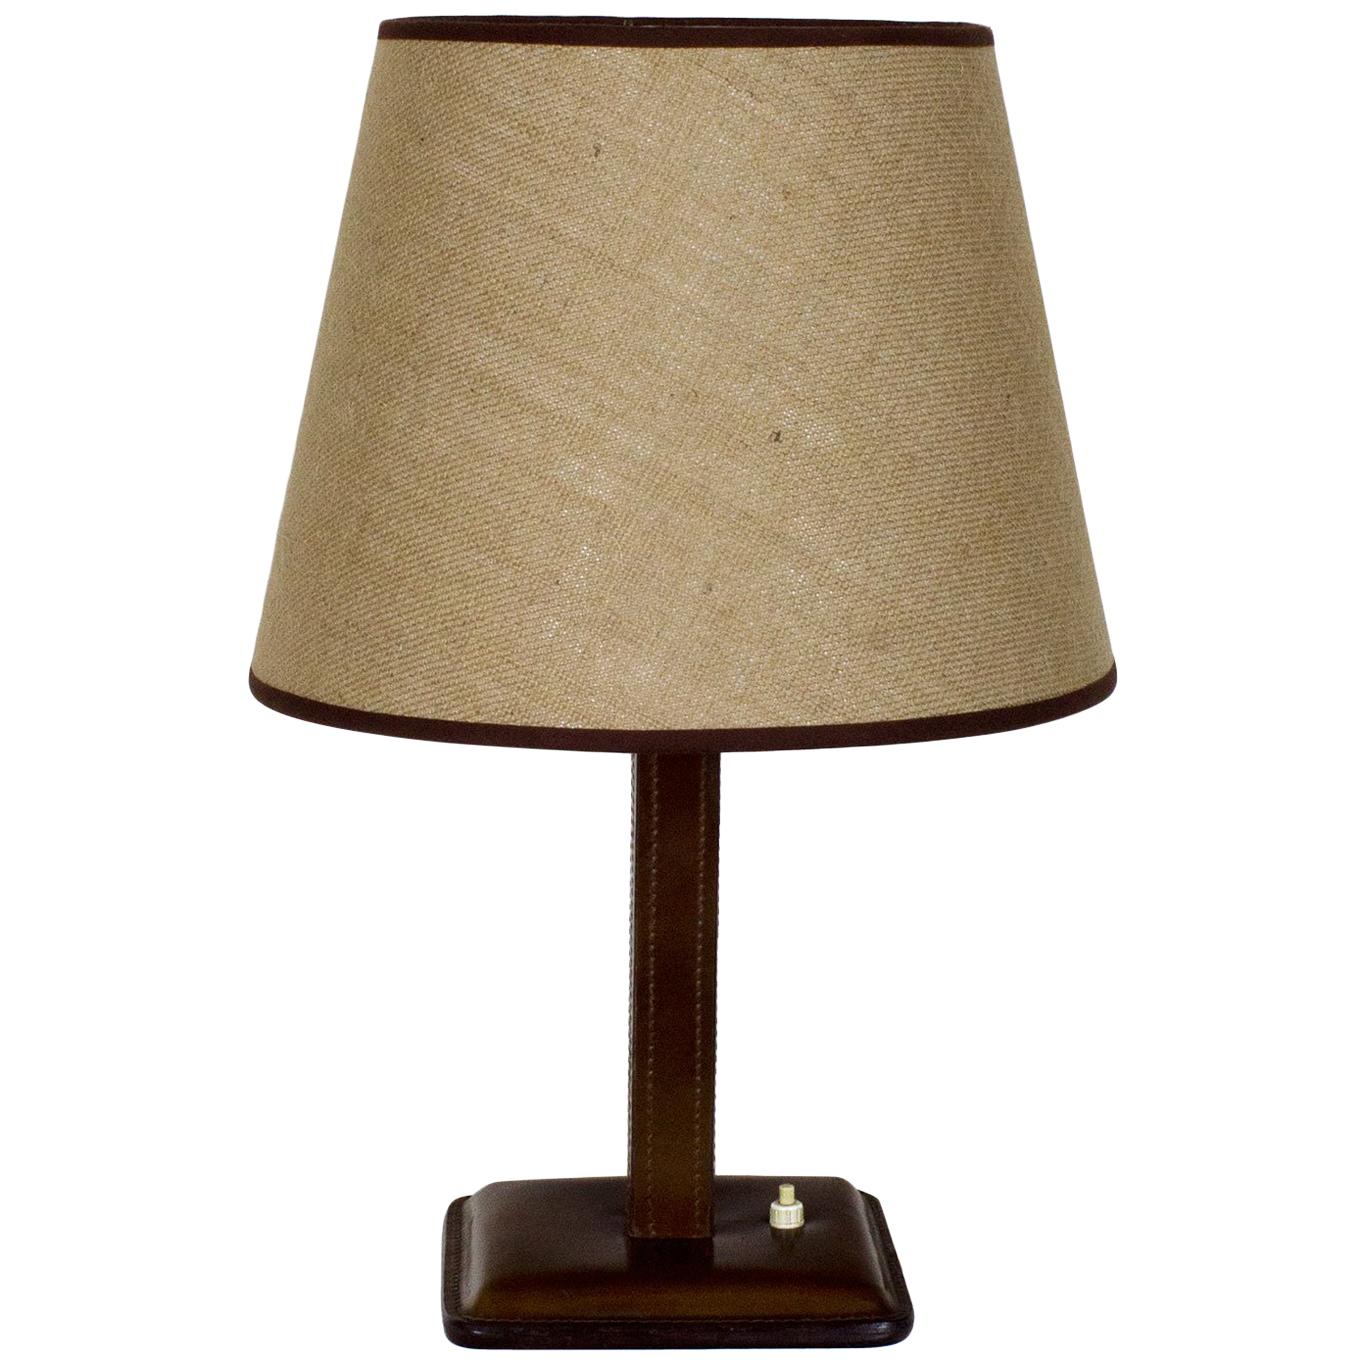 1950s Table Lamp, Leather, Light Thread Sewing, Jute Lampshade, Spain